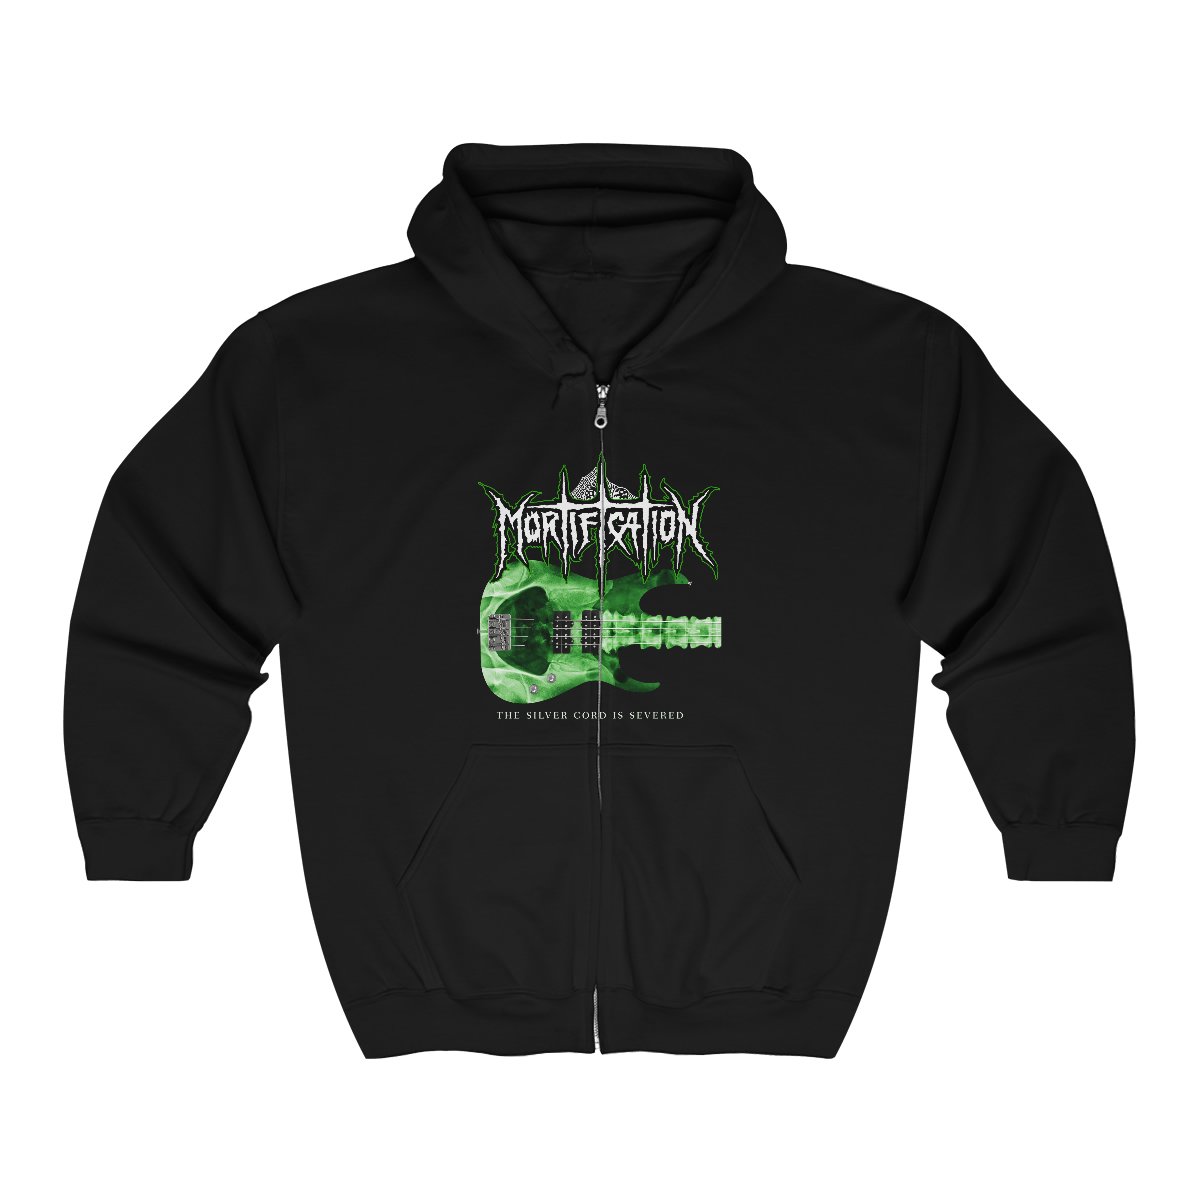 Mortification – The Silver Cord Is Severed Full Zip Hooded Sweatshirt